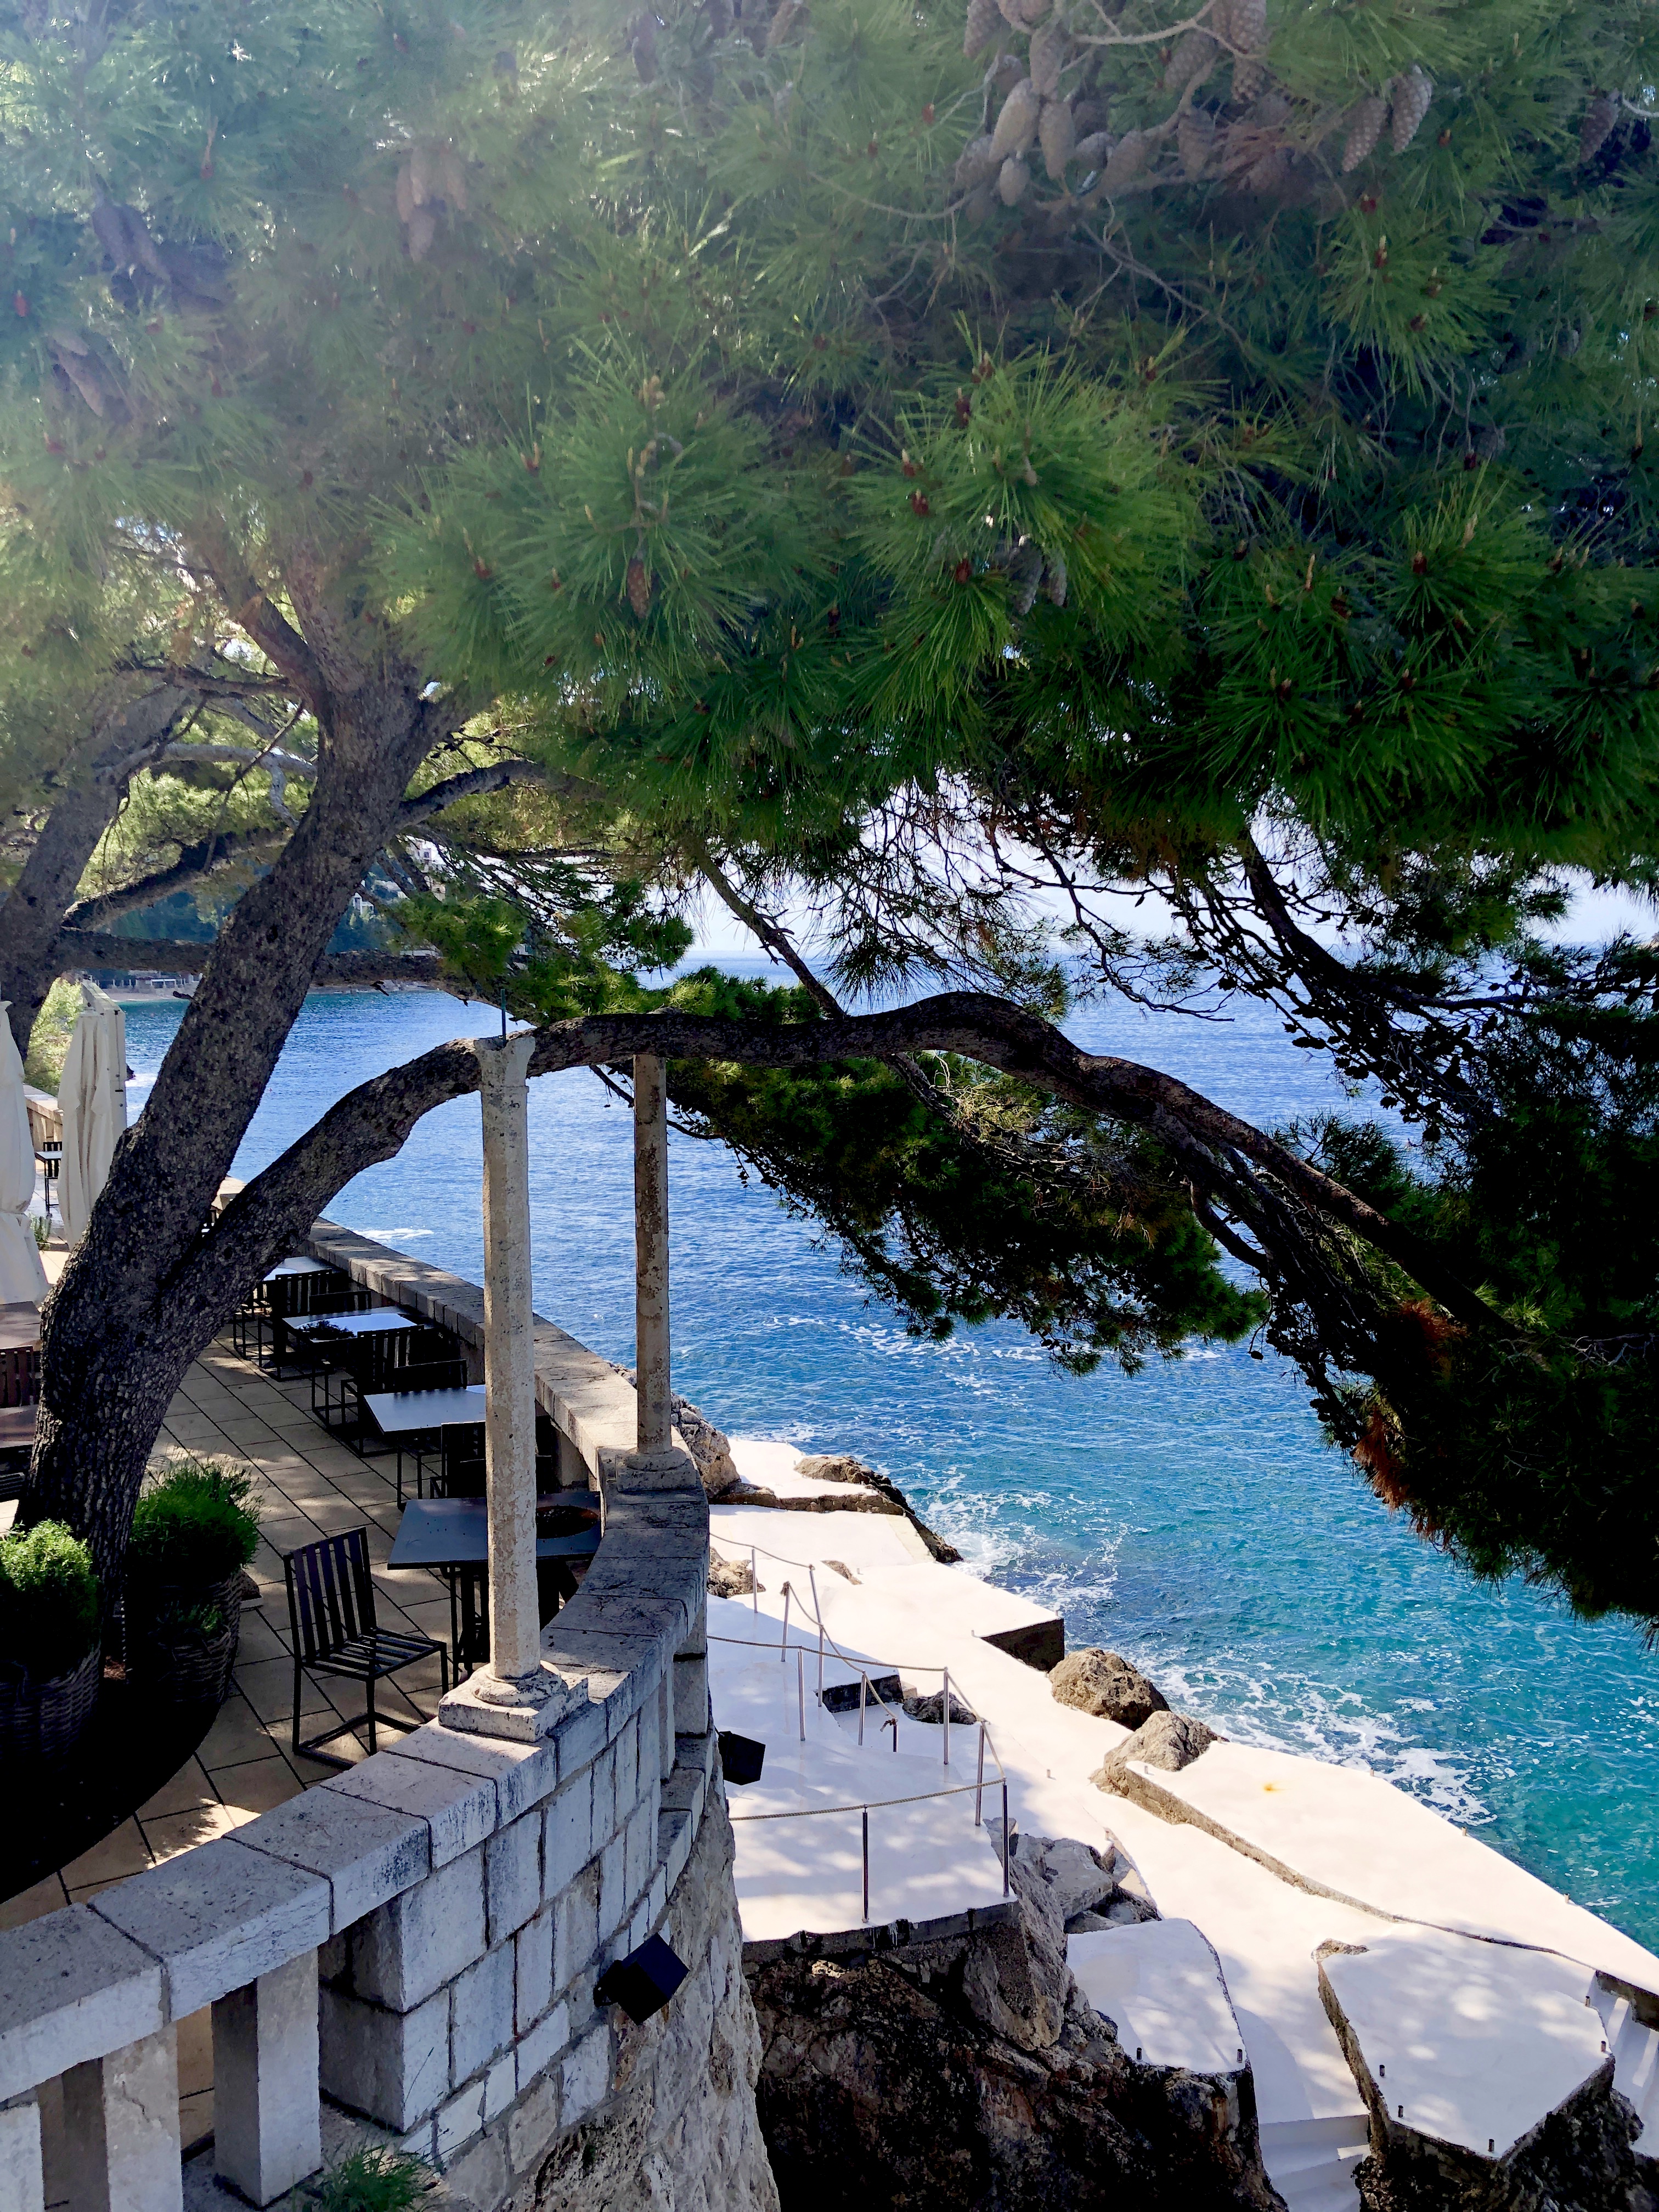 Tracy Dunn stayed at Villa Dubrovnik, and she highly recommends it!